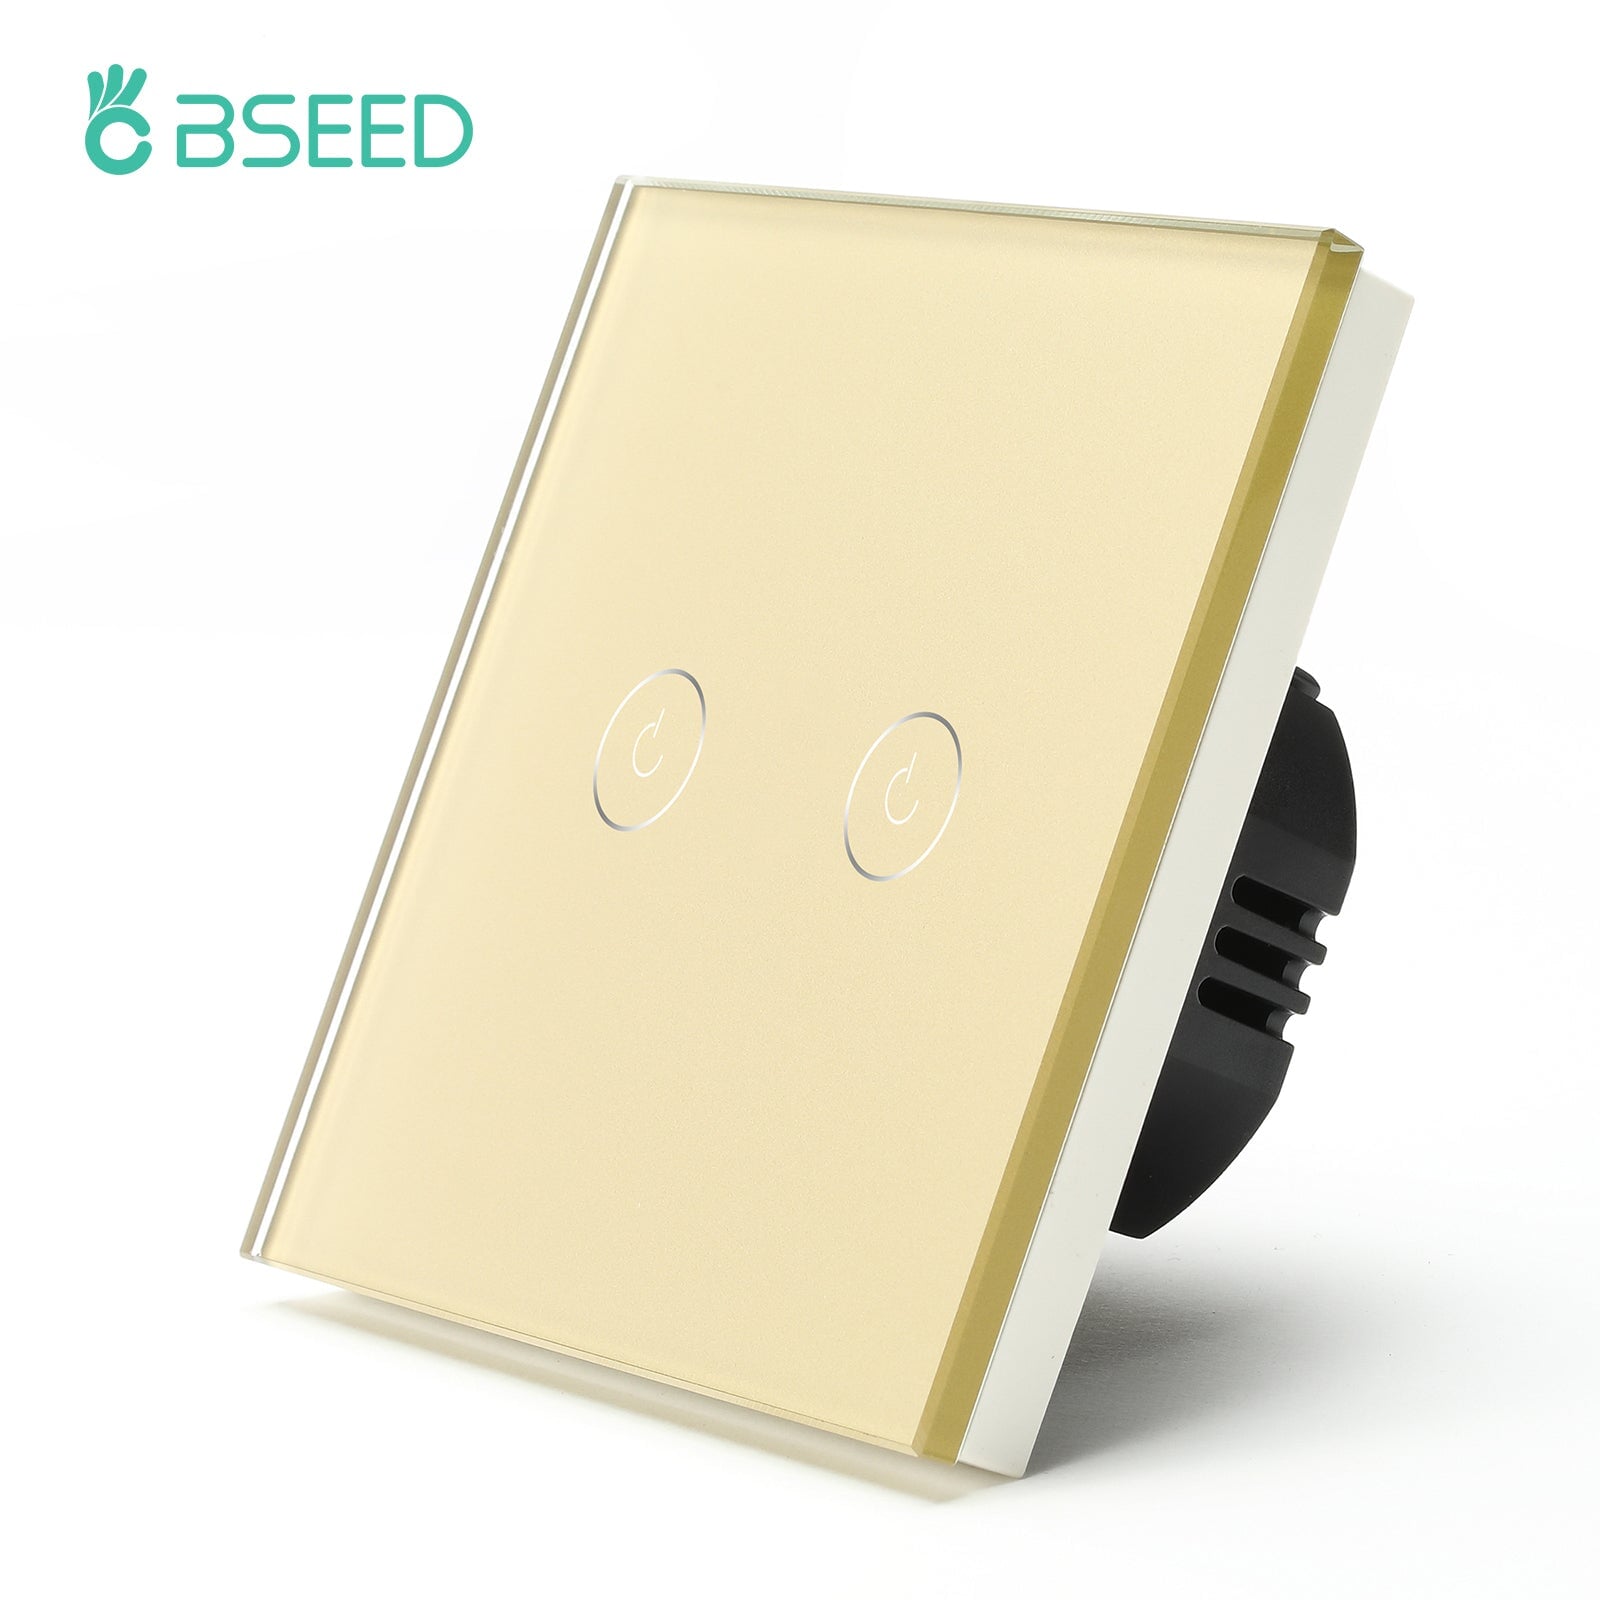 Bseed Smart Wifi Touch Switch 2 Gang 1/2/3 Way 1/2/3 Pcs/Pack Wall Plates & Covers Bseedswitch Golden 1Pcs/Pack 